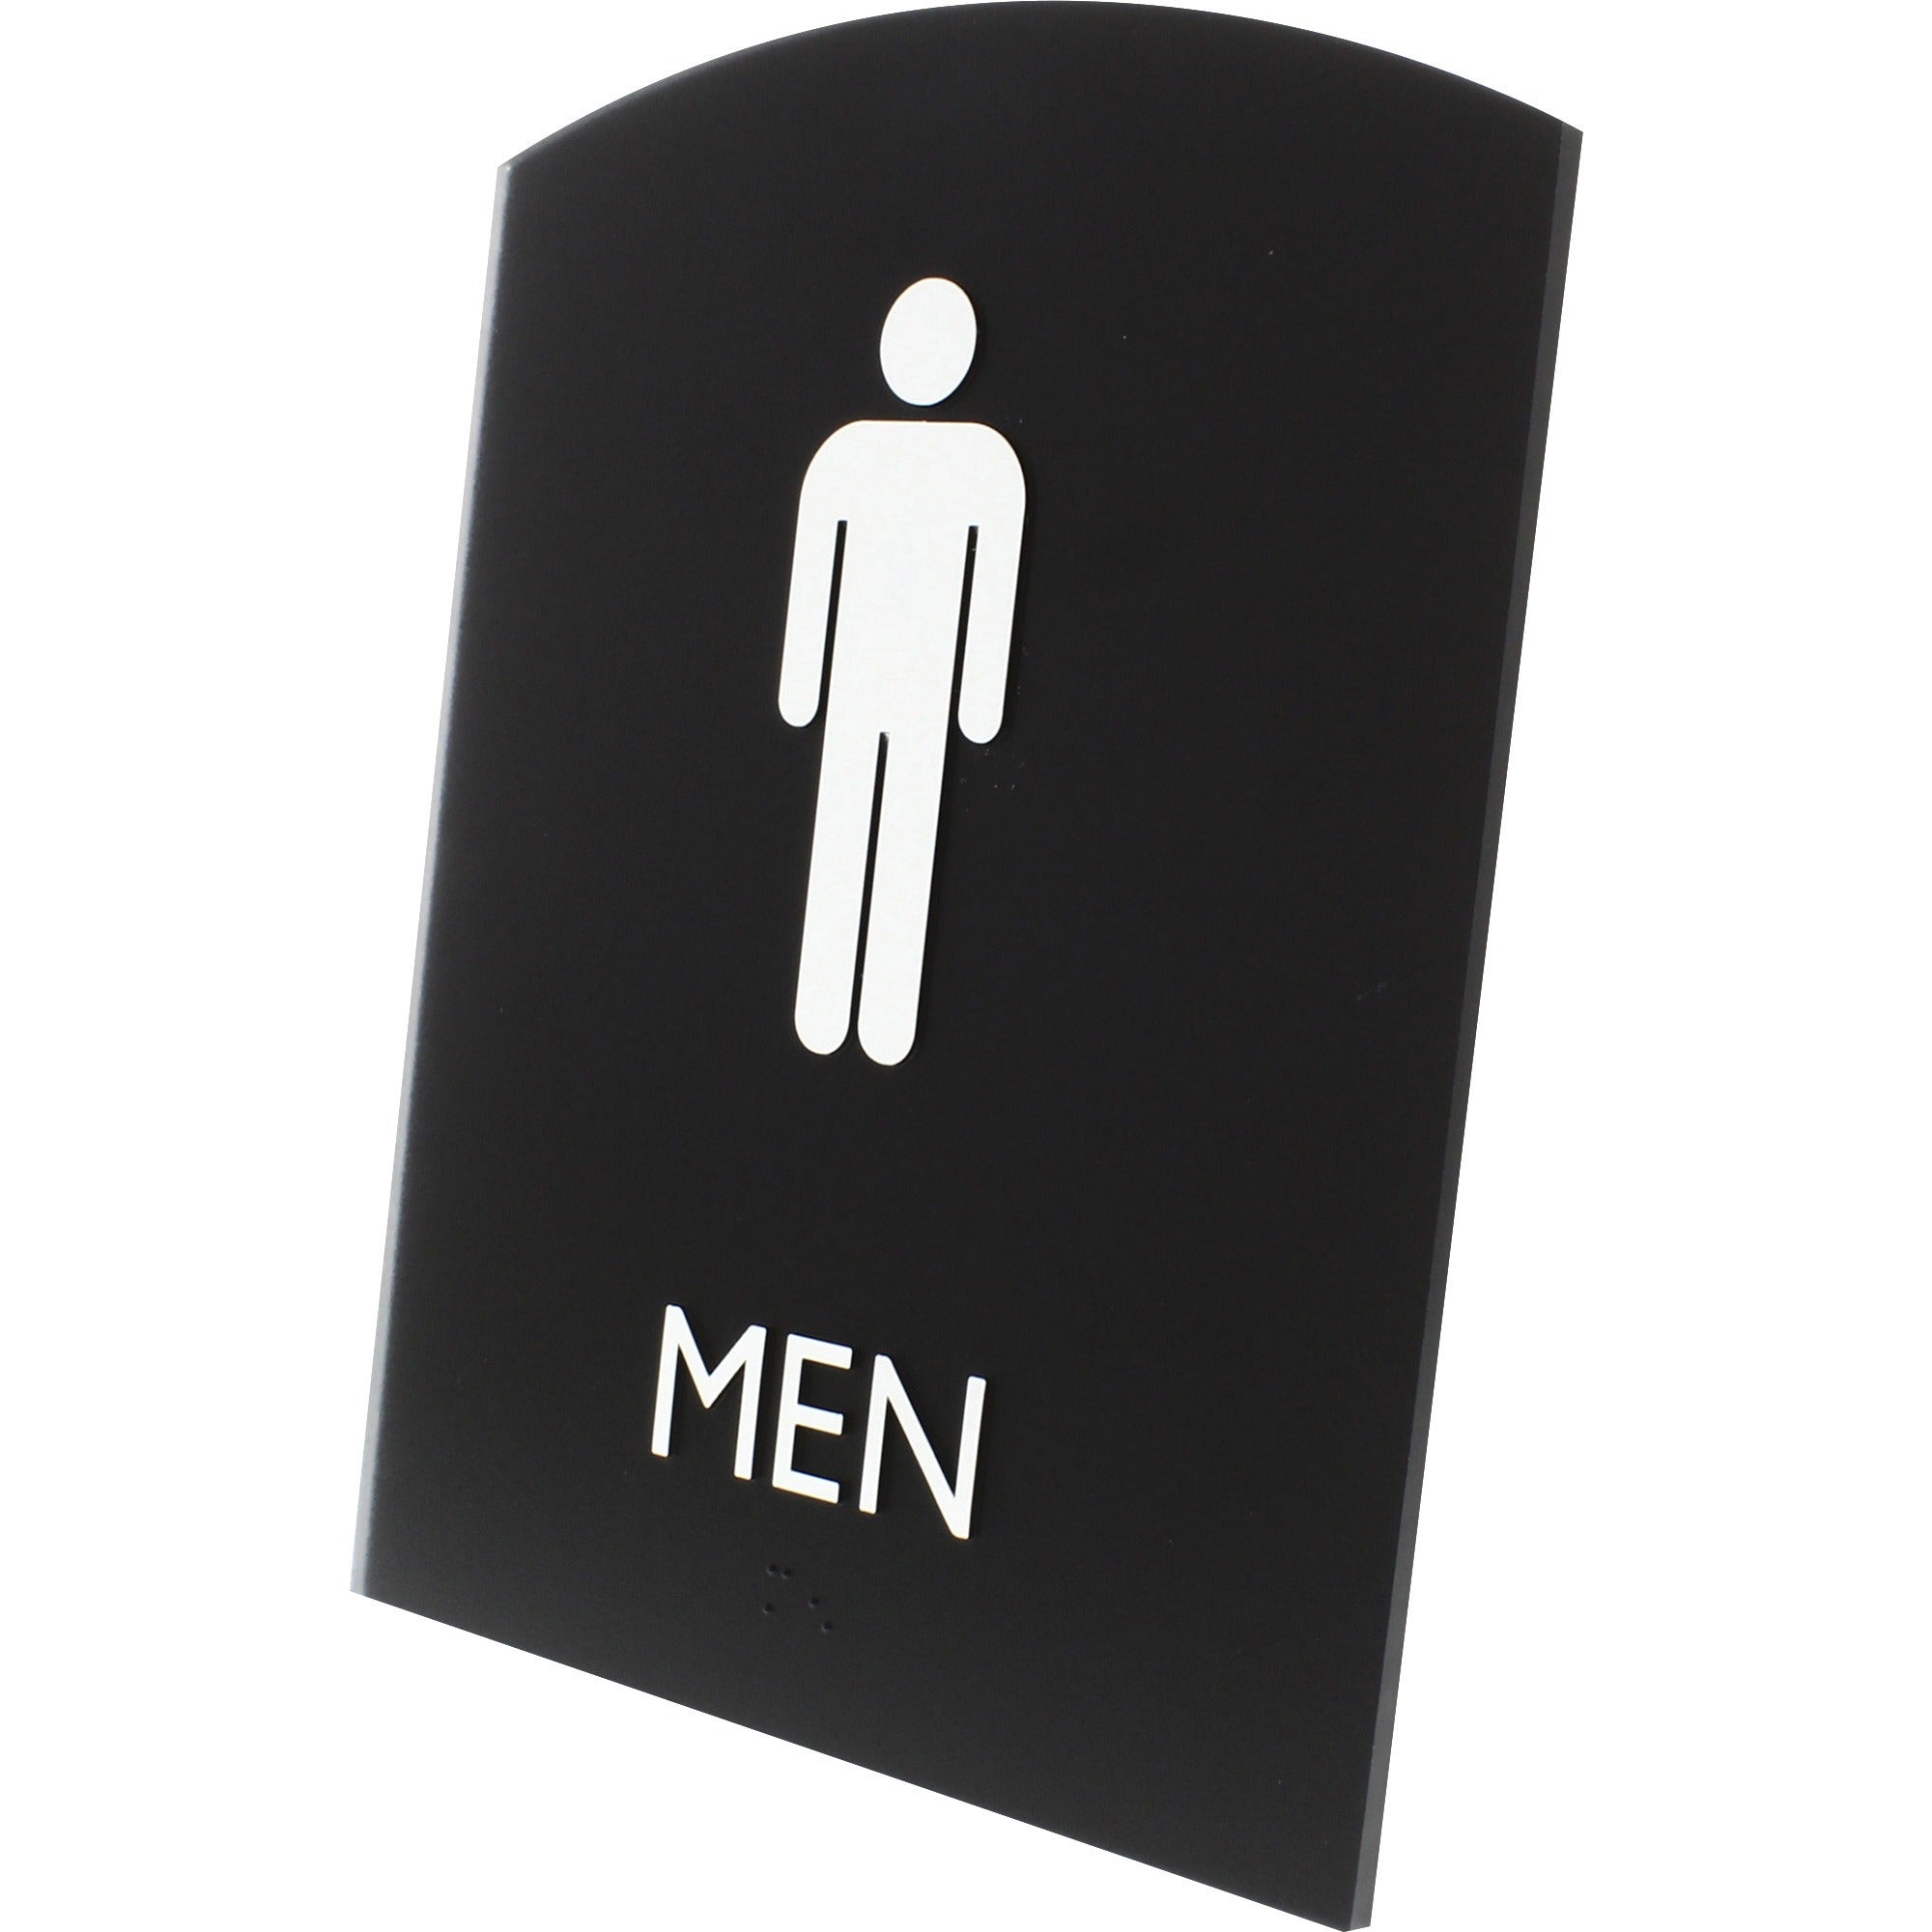 lorell-arched-mens-restroom-sign-1-each-men-print-message-68-width-x-85-height-rectangular-shape-surface-mountable-easy-readability-braille-plastic-black_llr02676 - 2